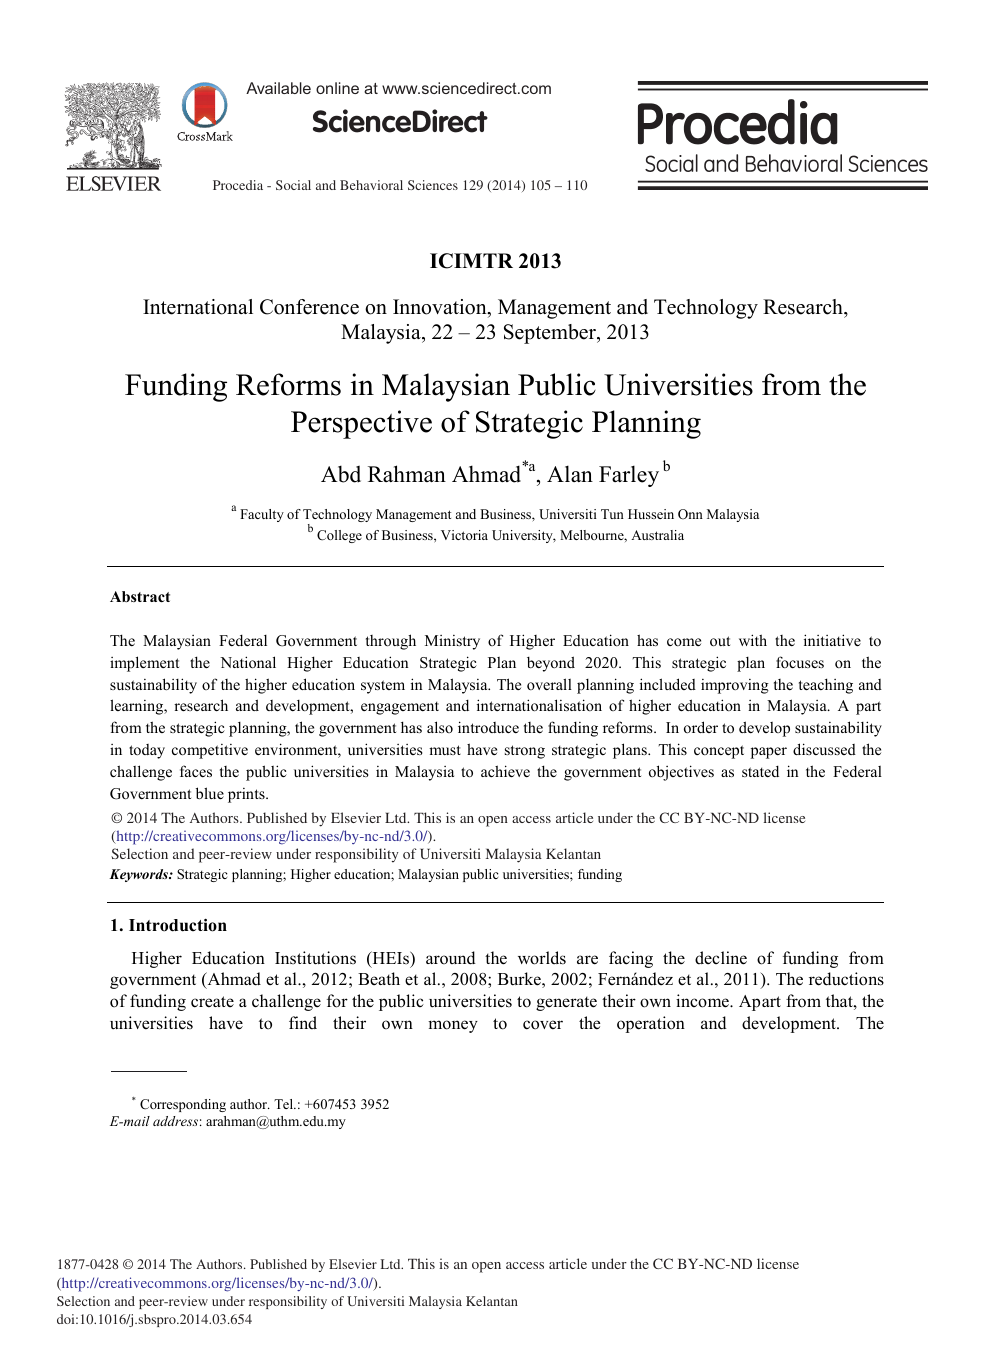 Funding Reforms In Malaysian Public Universities From The Perspective Of Strategic Planning Topic Of Research Paper In Economics And Business Download Scholarly Article Pdf And Read For Free On Cyberleninka Open